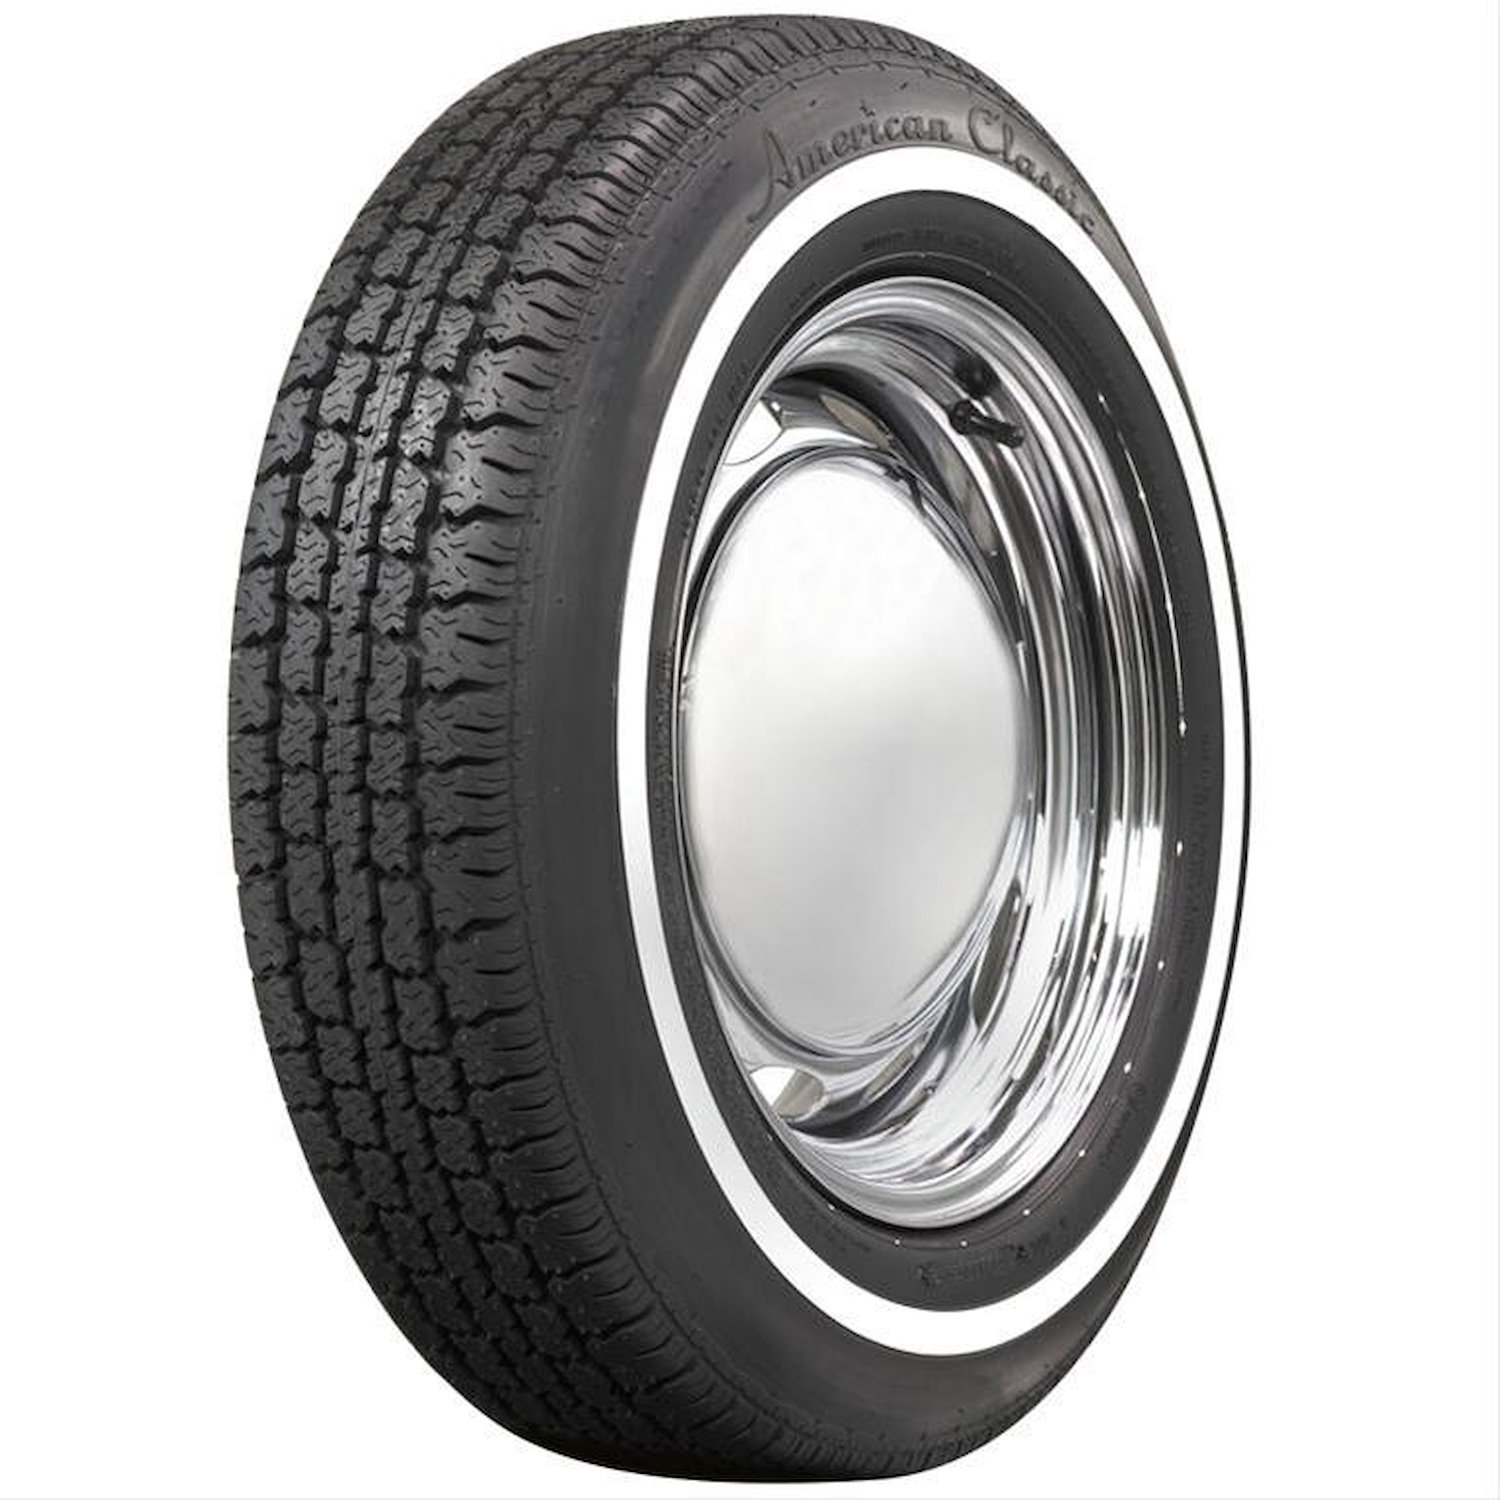 579816 Tire, American Classic Radial, 3/4-Inch Whitewall, 165R15